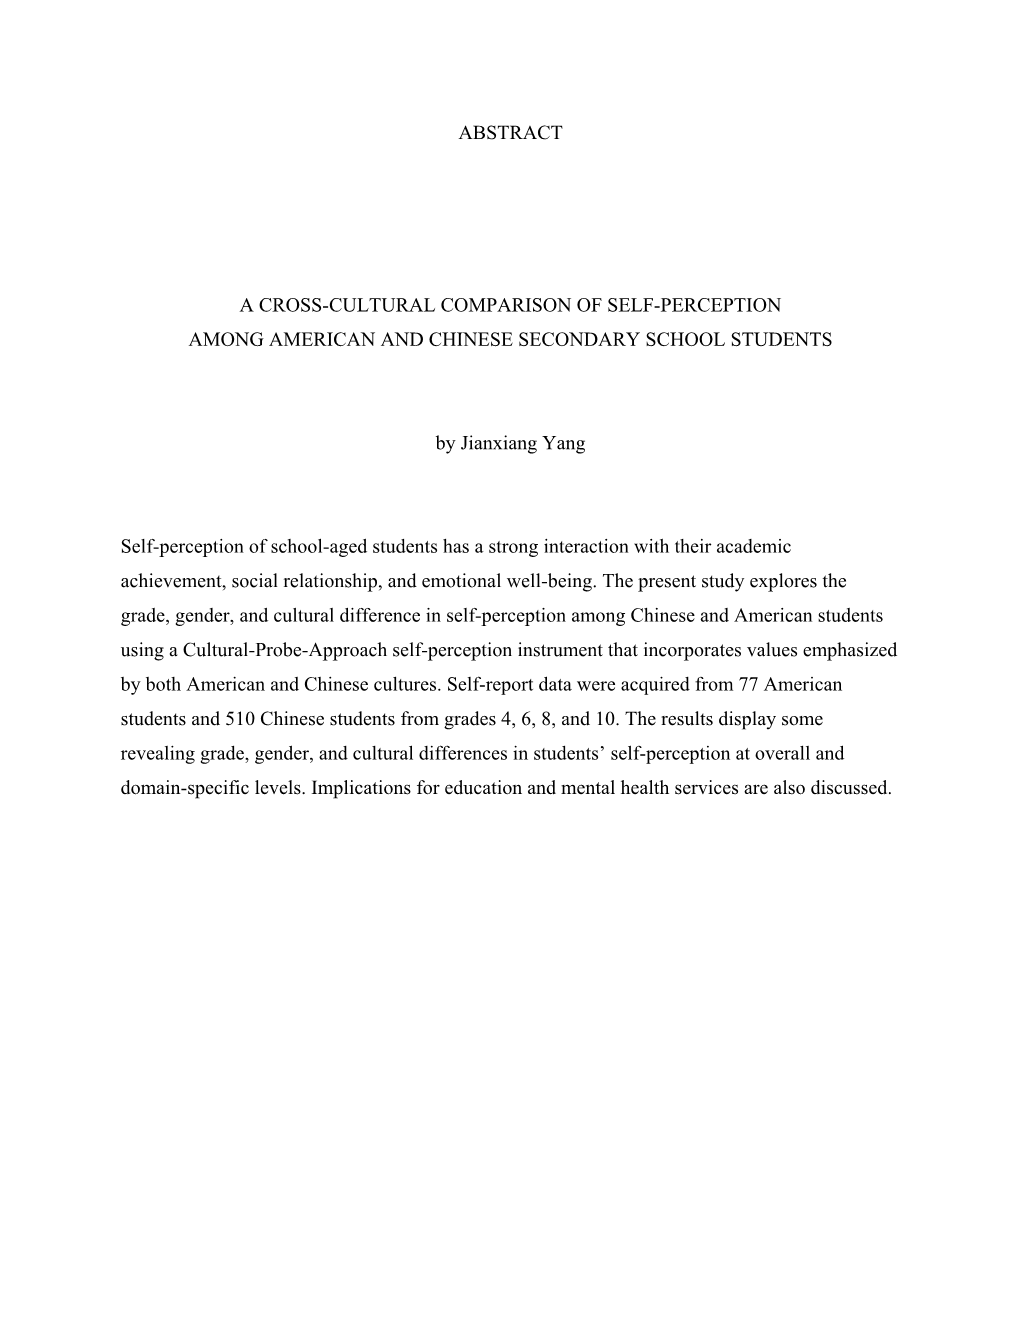 ABSTRACT a CROSS-CULTURAL COMPARISON of SELF-PERCEPTION AMONG AMERICAN and CHINESE SECONDARY SCHOOL STUDENTS by Jianxiang Yang S